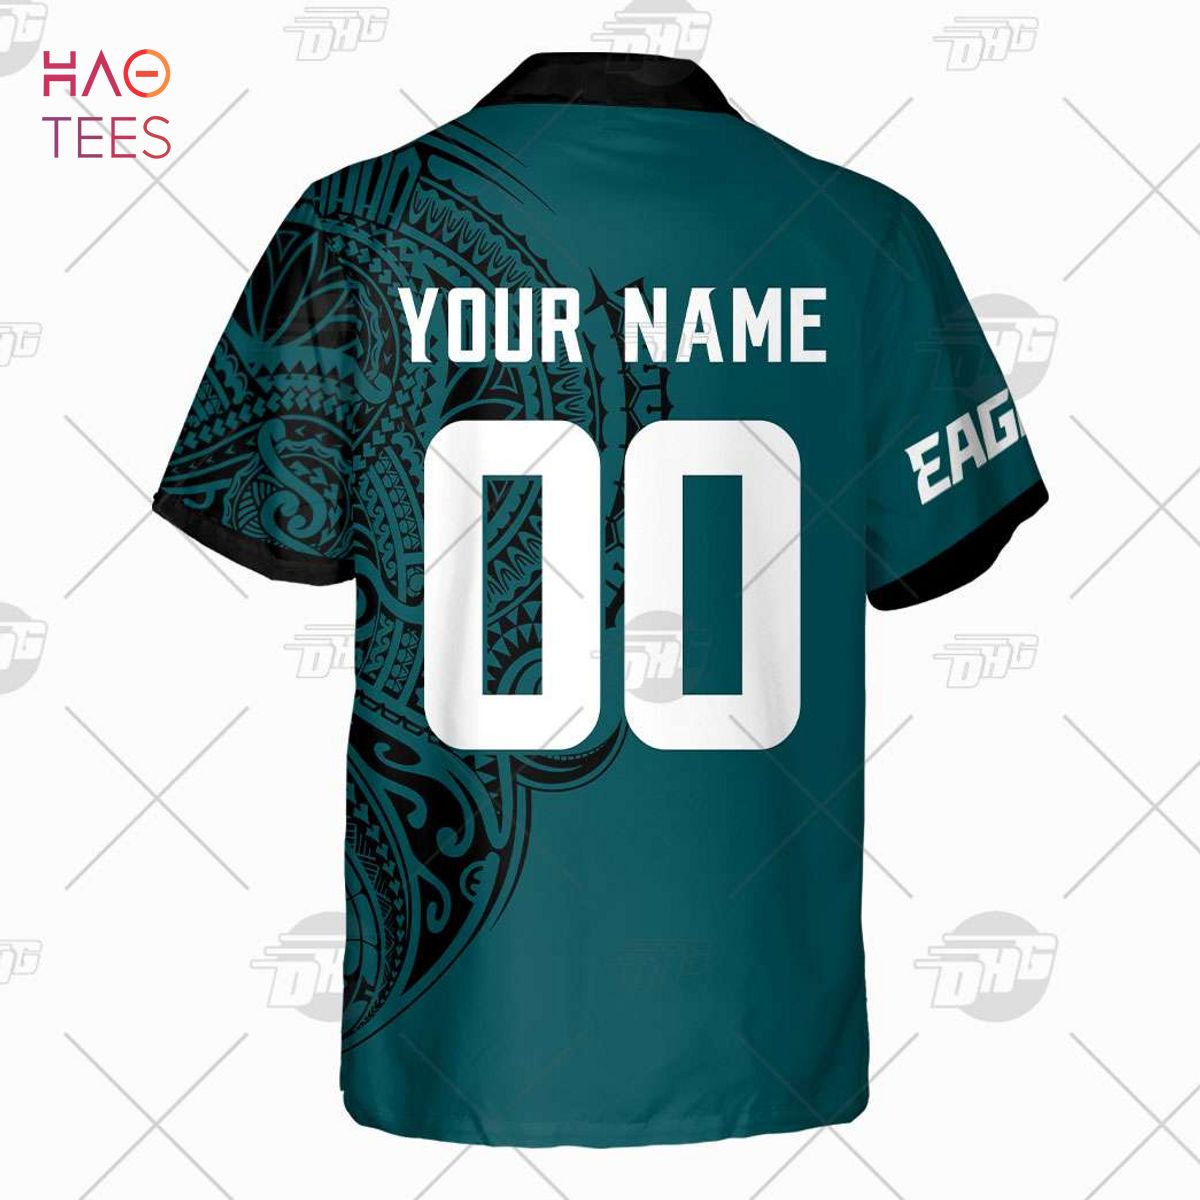 Eagles Shirt All-Time Greats Philadelphia Eagles Gift - Personalized Gifts:  Family, Sports, Occasions, Trending